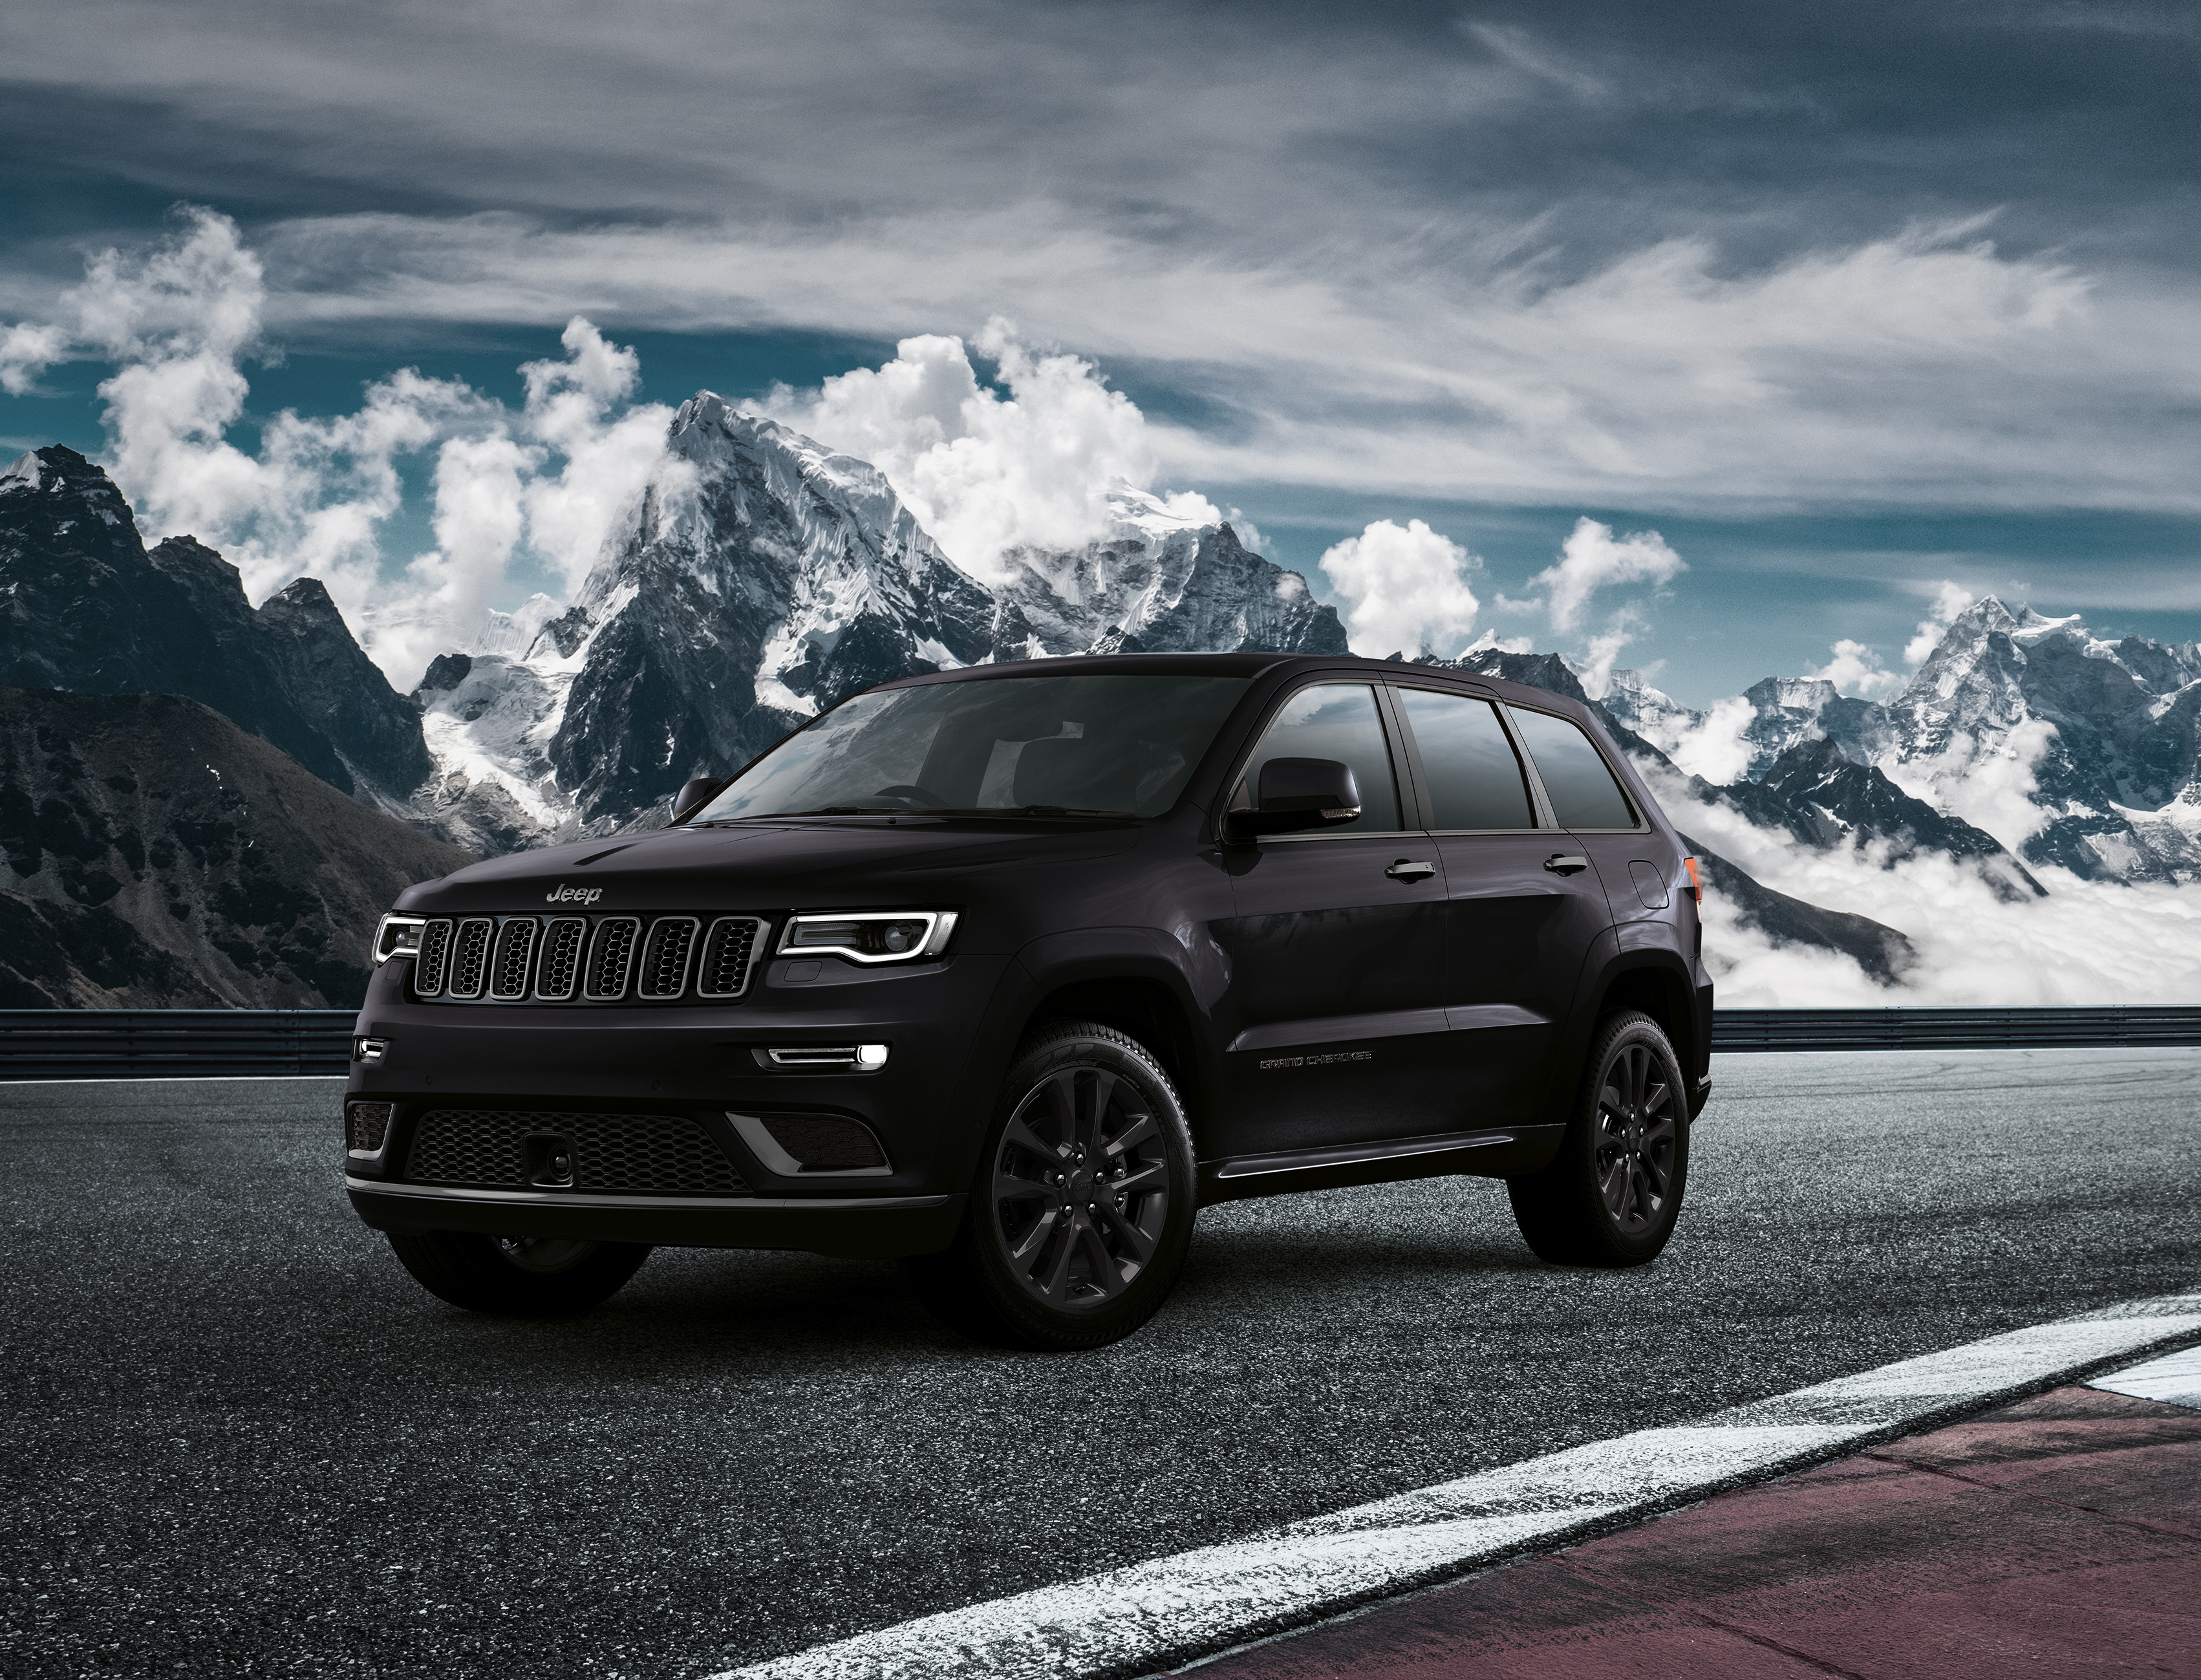 Jeep Grand Cherokee S 2018, HD Cars, 4k Wallpapers, Images